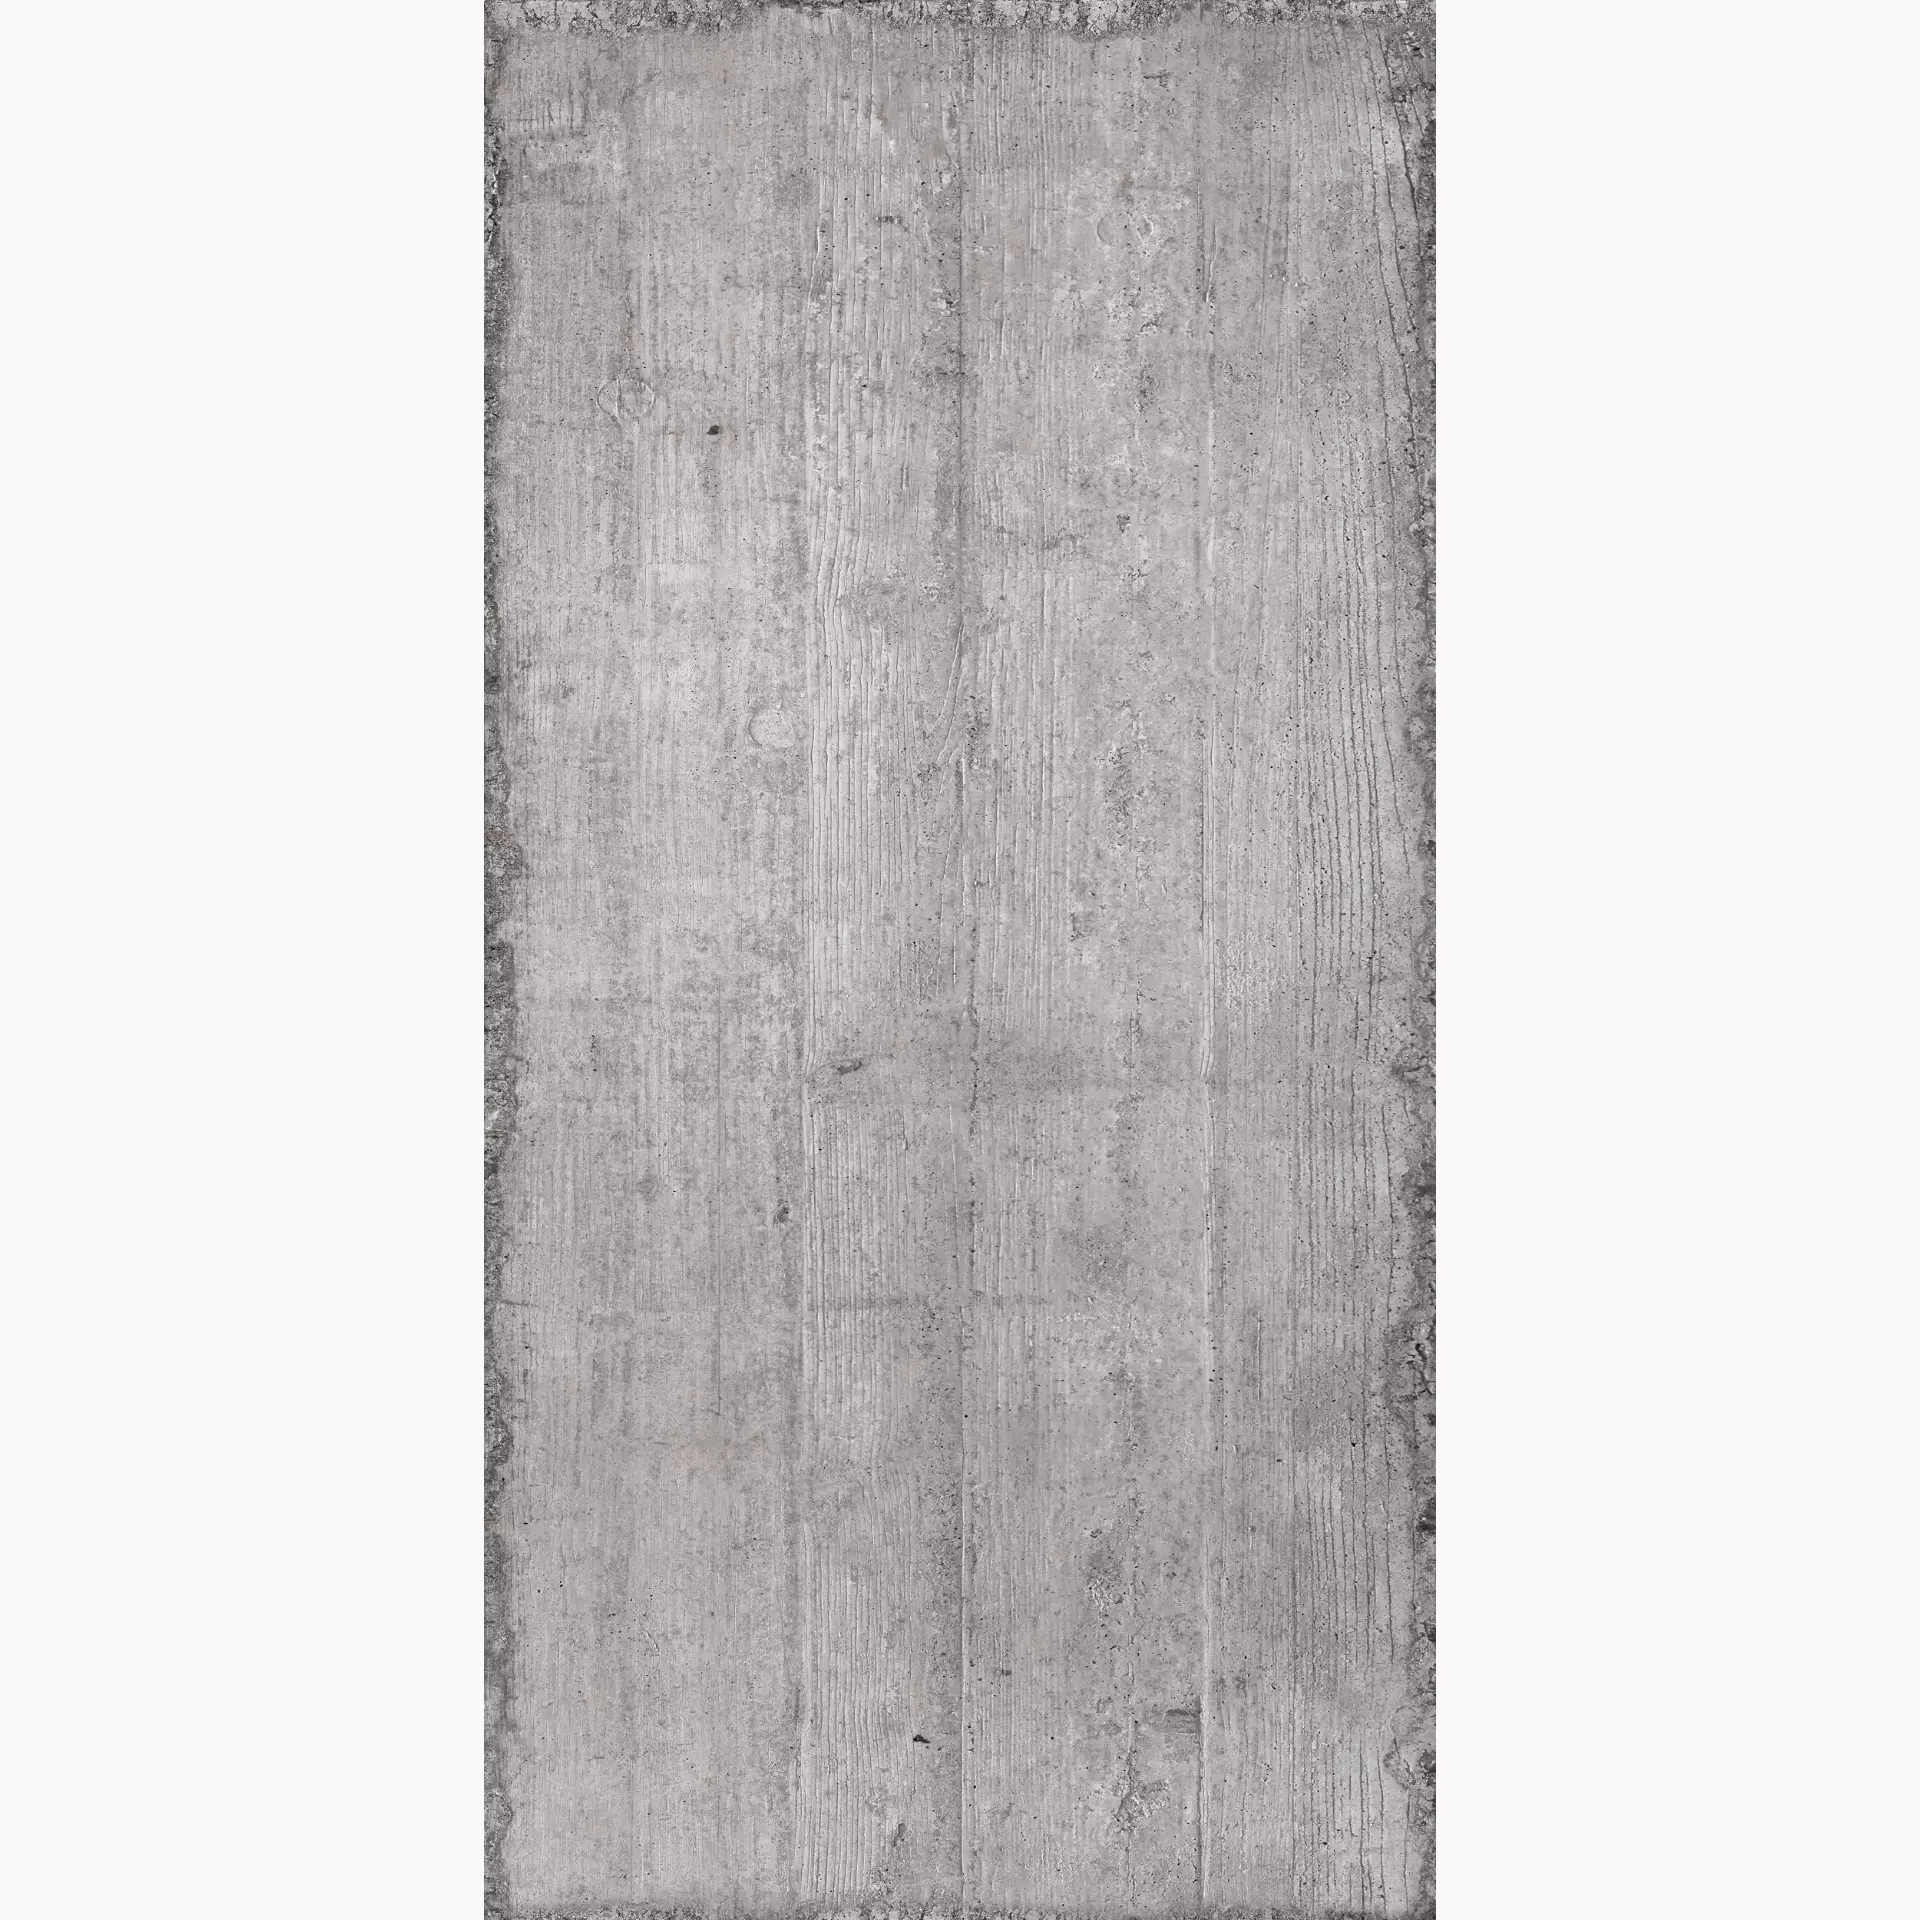 Sant Agostino Form Grey Natural CSAFORGR12 60x120cm rectified 10mm